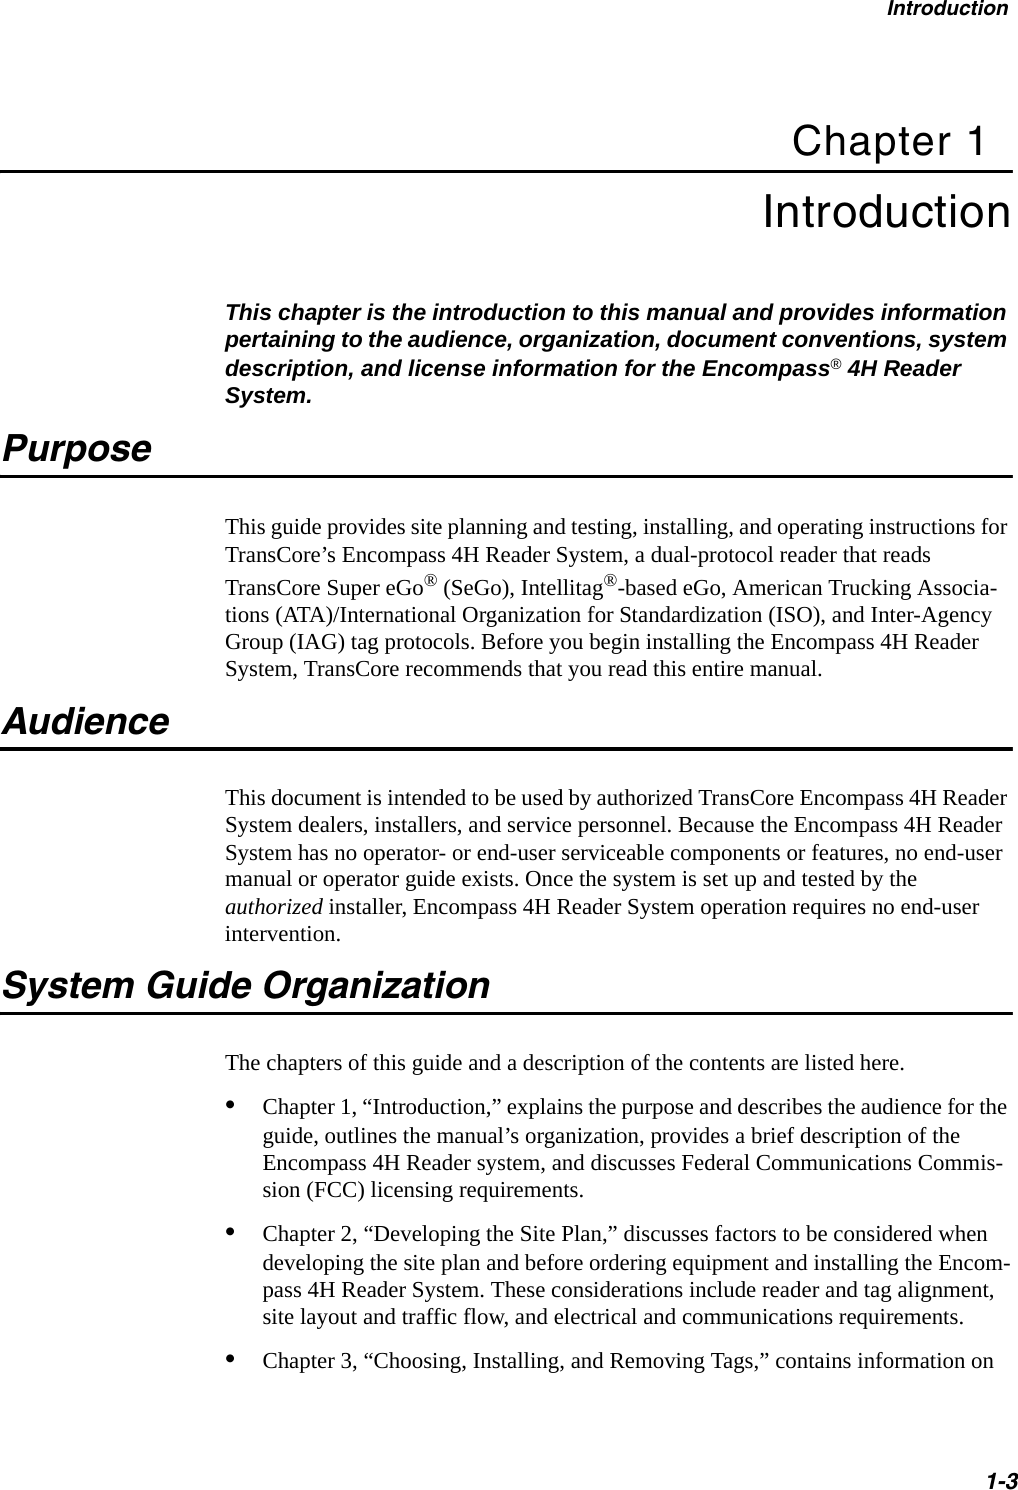 Introduction1-3Chapter 1Introduction This chapter is the introduction to this manual and provides information pertaining to the audience, organization, document conventions, system description, and license information for the Encompass® 4H Reader System. PurposeThis guide provides site planning and testing, installing, and operating instructions for TransCore’s Encompass 4H Reader System, a dual-protocol reader that reads TransCore Super eGo® (SeGo), Intellitag®-based eGo, American Trucking Associa-tions (ATA)/International Organization for Standardization (ISO), and Inter-Agency Group (IAG) tag protocols. Before you begin installing the Encompass 4H Reader System, TransCore recommends that you read this entire manual.AudienceThis document is intended to be used by authorized TransCore Encompass 4H Reader System dealers, installers, and service personnel. Because the Encompass 4H Reader System has no operator- or end-user serviceable components or features, no end-user manual or operator guide exists. Once the system is set up and tested by the authorized installer, Encompass 4H Reader System operation requires no end-user intervention.System Guide OrganizationThe chapters of this guide and a description of the contents are listed here. •Chapter 1, “Introduction,” explains the purpose and describes the audience for the guide, outlines the manual’s organization, provides a brief description of the Encompass 4H Reader system, and discusses Federal Communications Commis-sion (FCC) licensing requirements.•Chapter 2, “Developing the Site Plan,” discusses factors to be considered when developing the site plan and before ordering equipment and installing the Encom-pass 4H Reader System. These considerations include reader and tag alignment, site layout and traffic flow, and electrical and communications requirements.•Chapter 3, “Choosing, Installing, and Removing Tags,” contains information on 